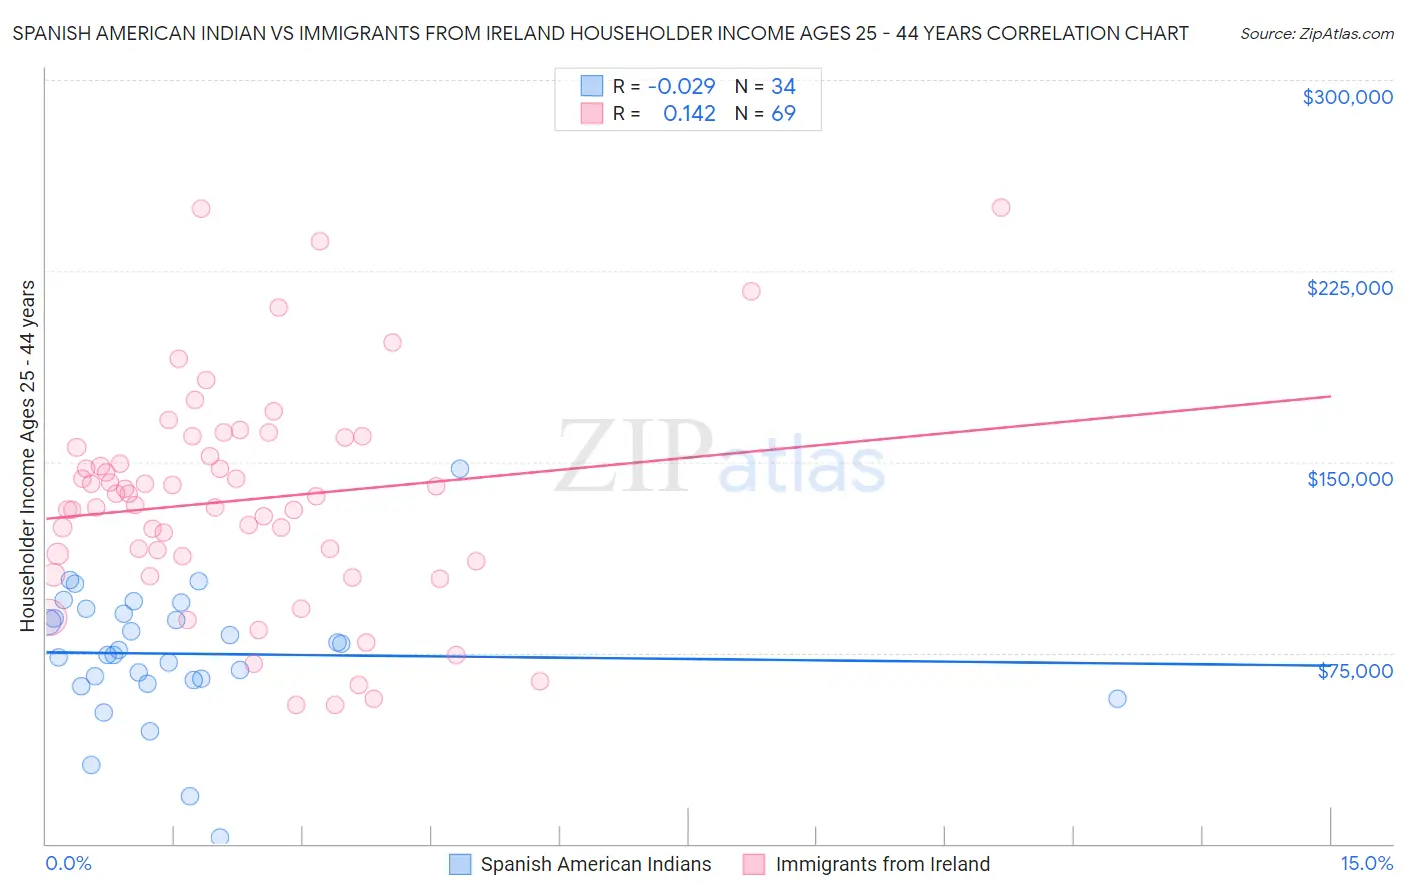 Spanish American Indian vs Immigrants from Ireland Householder Income Ages 25 - 44 years